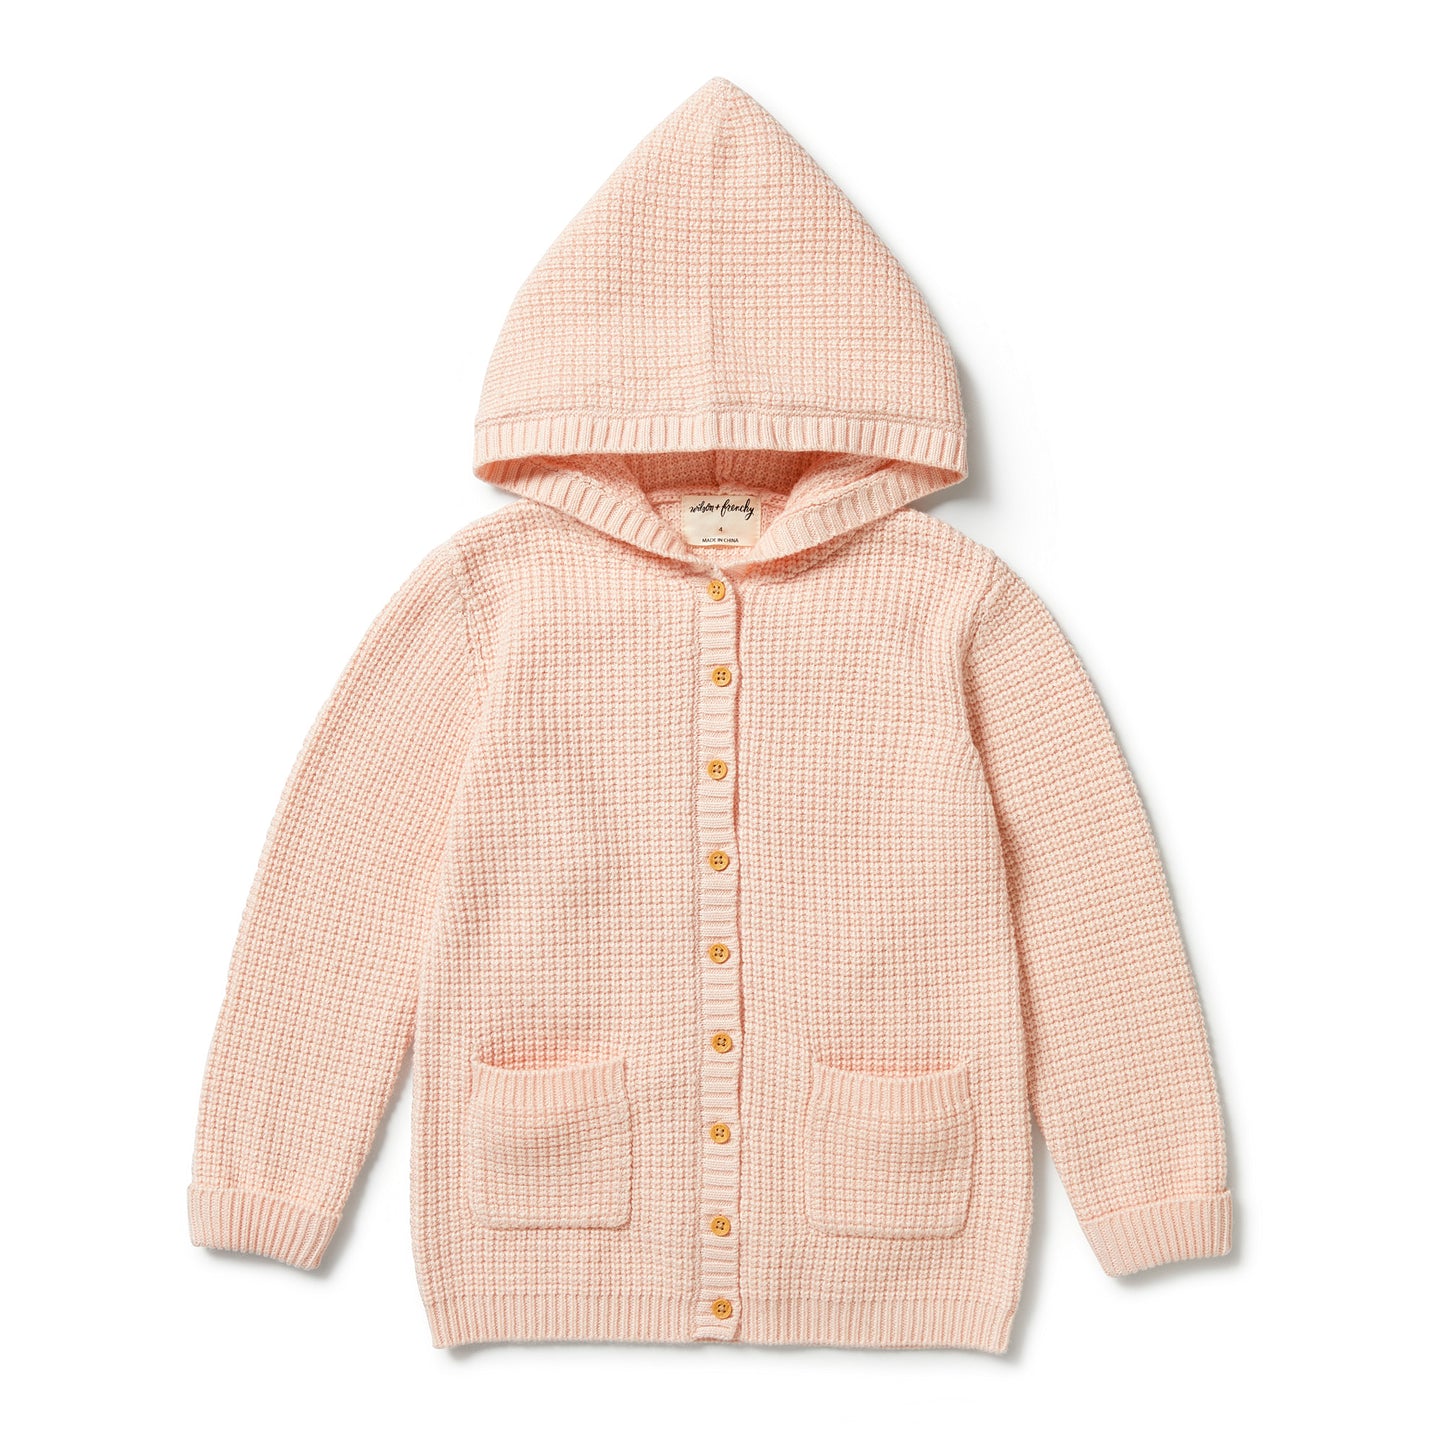 Wilson & Frenchy Knitted Button Jacket - Blush